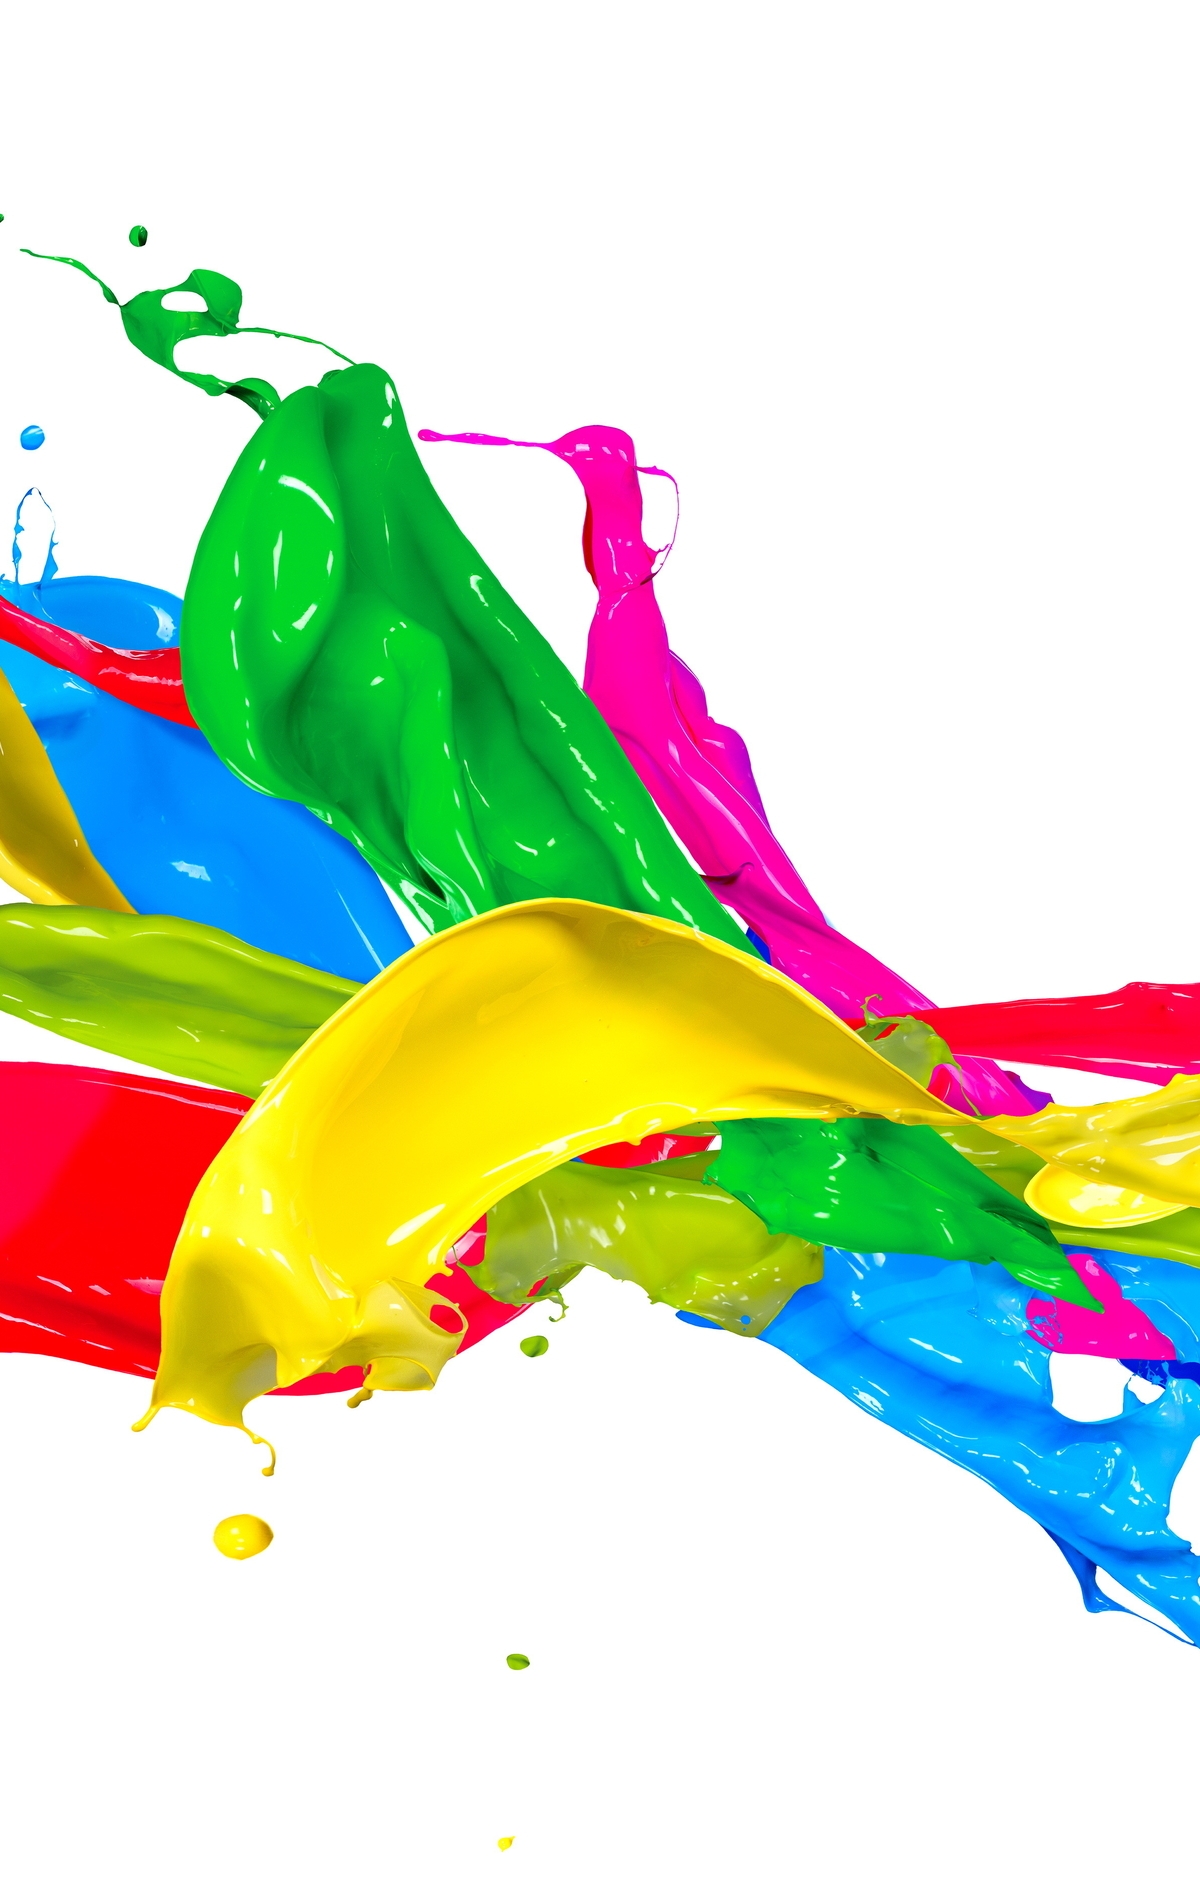 Image: Paint, color, brightness, white background, squirt